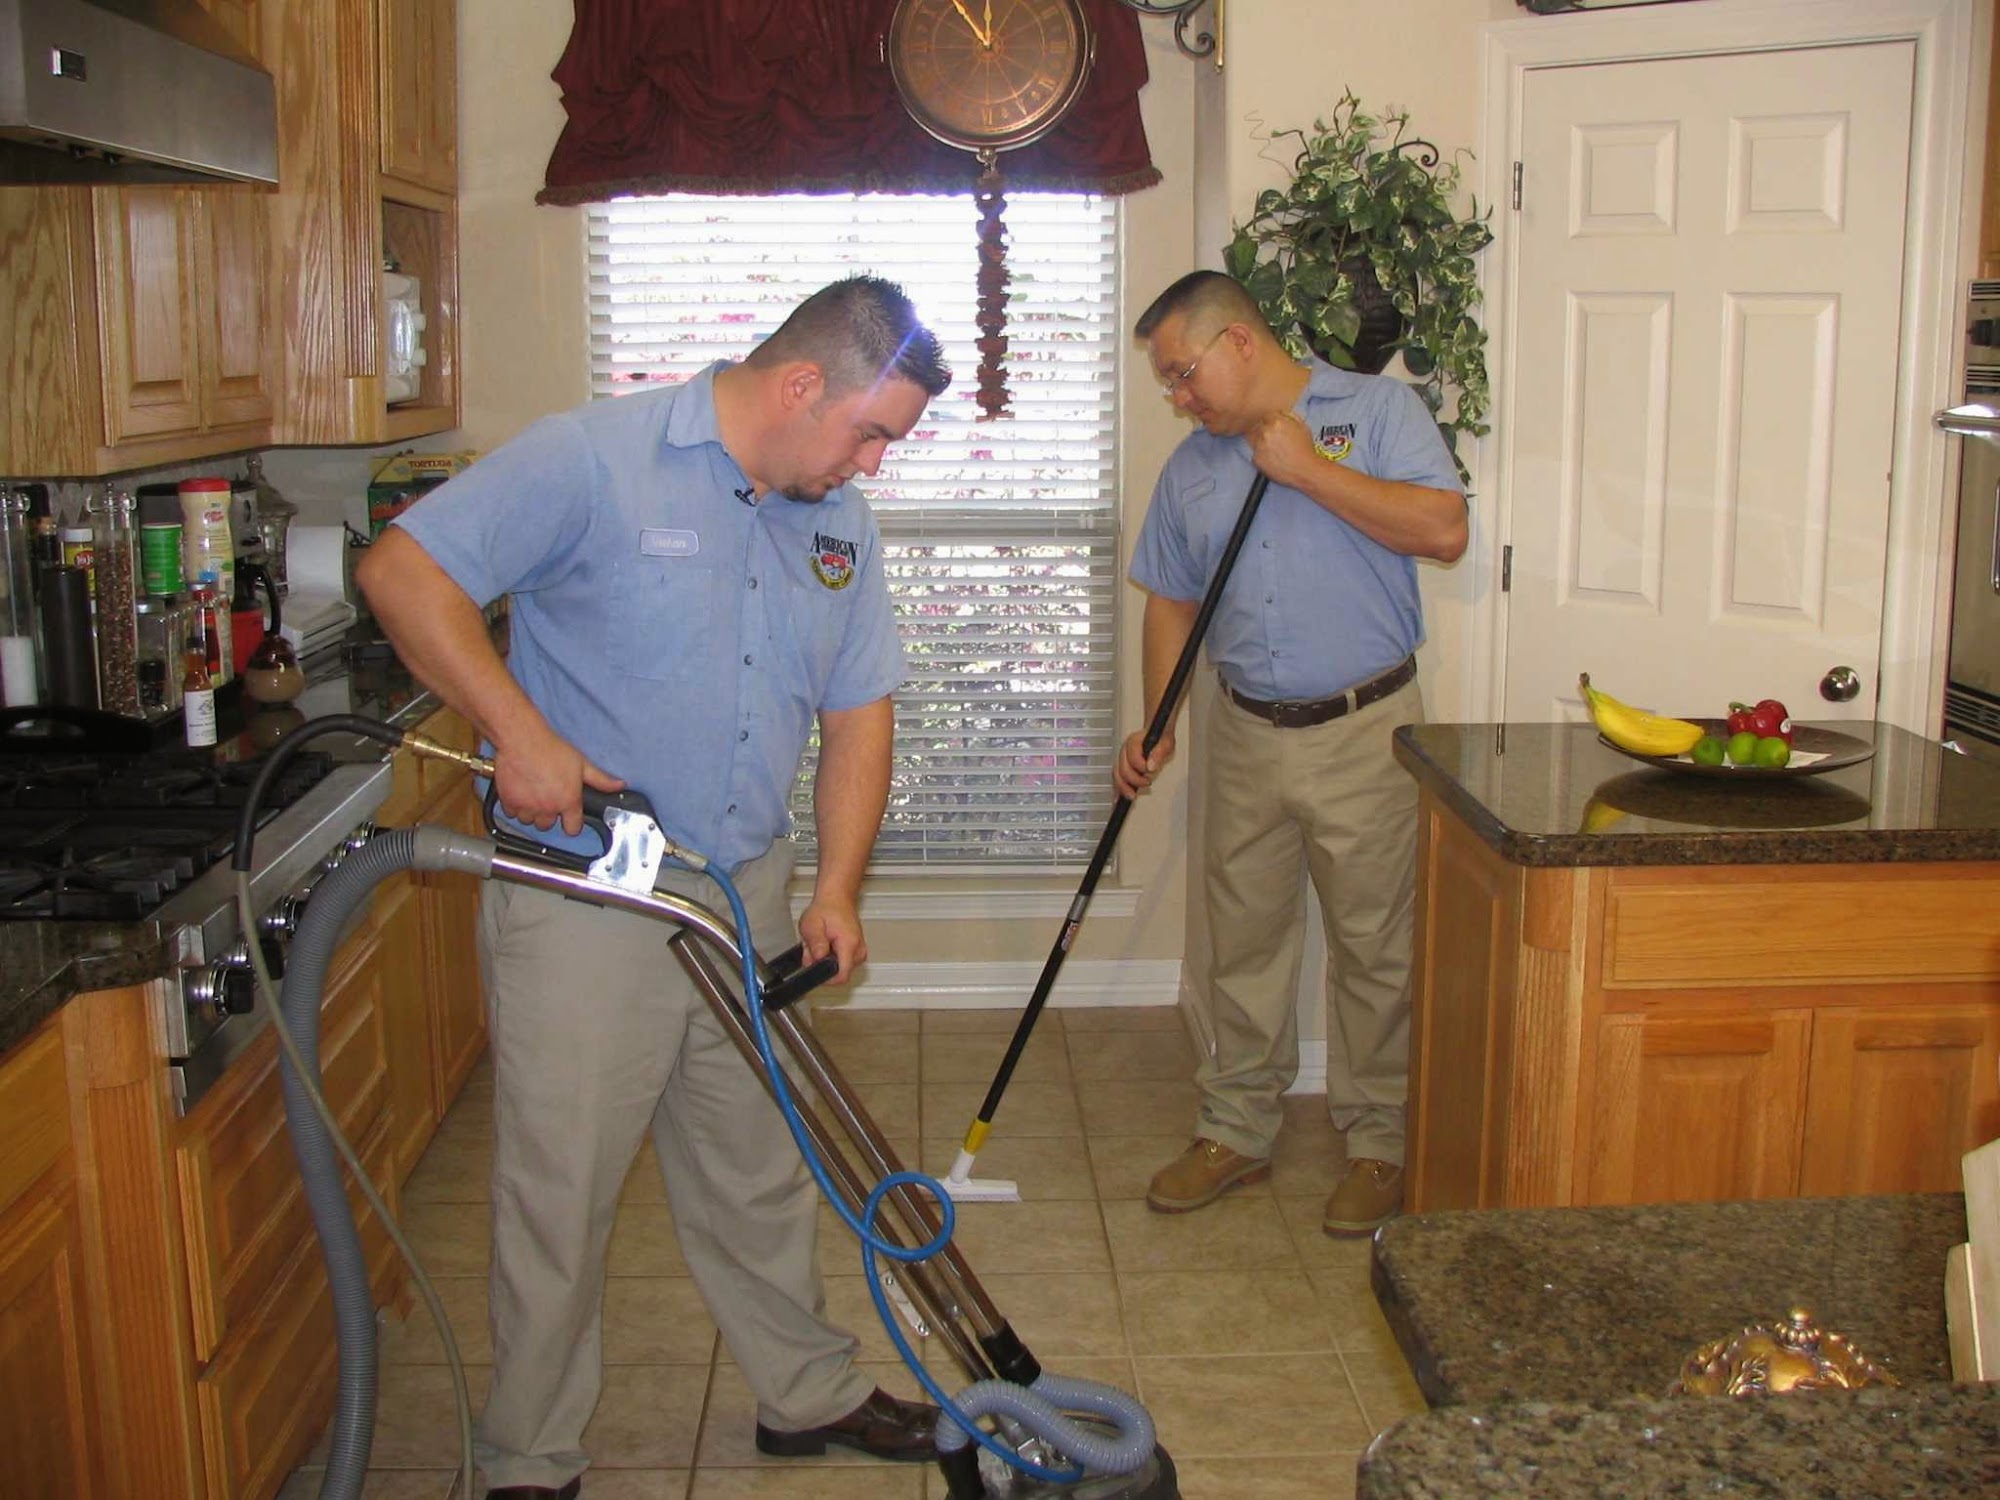 American Steam-A-Way Professional Carpet Cleaning